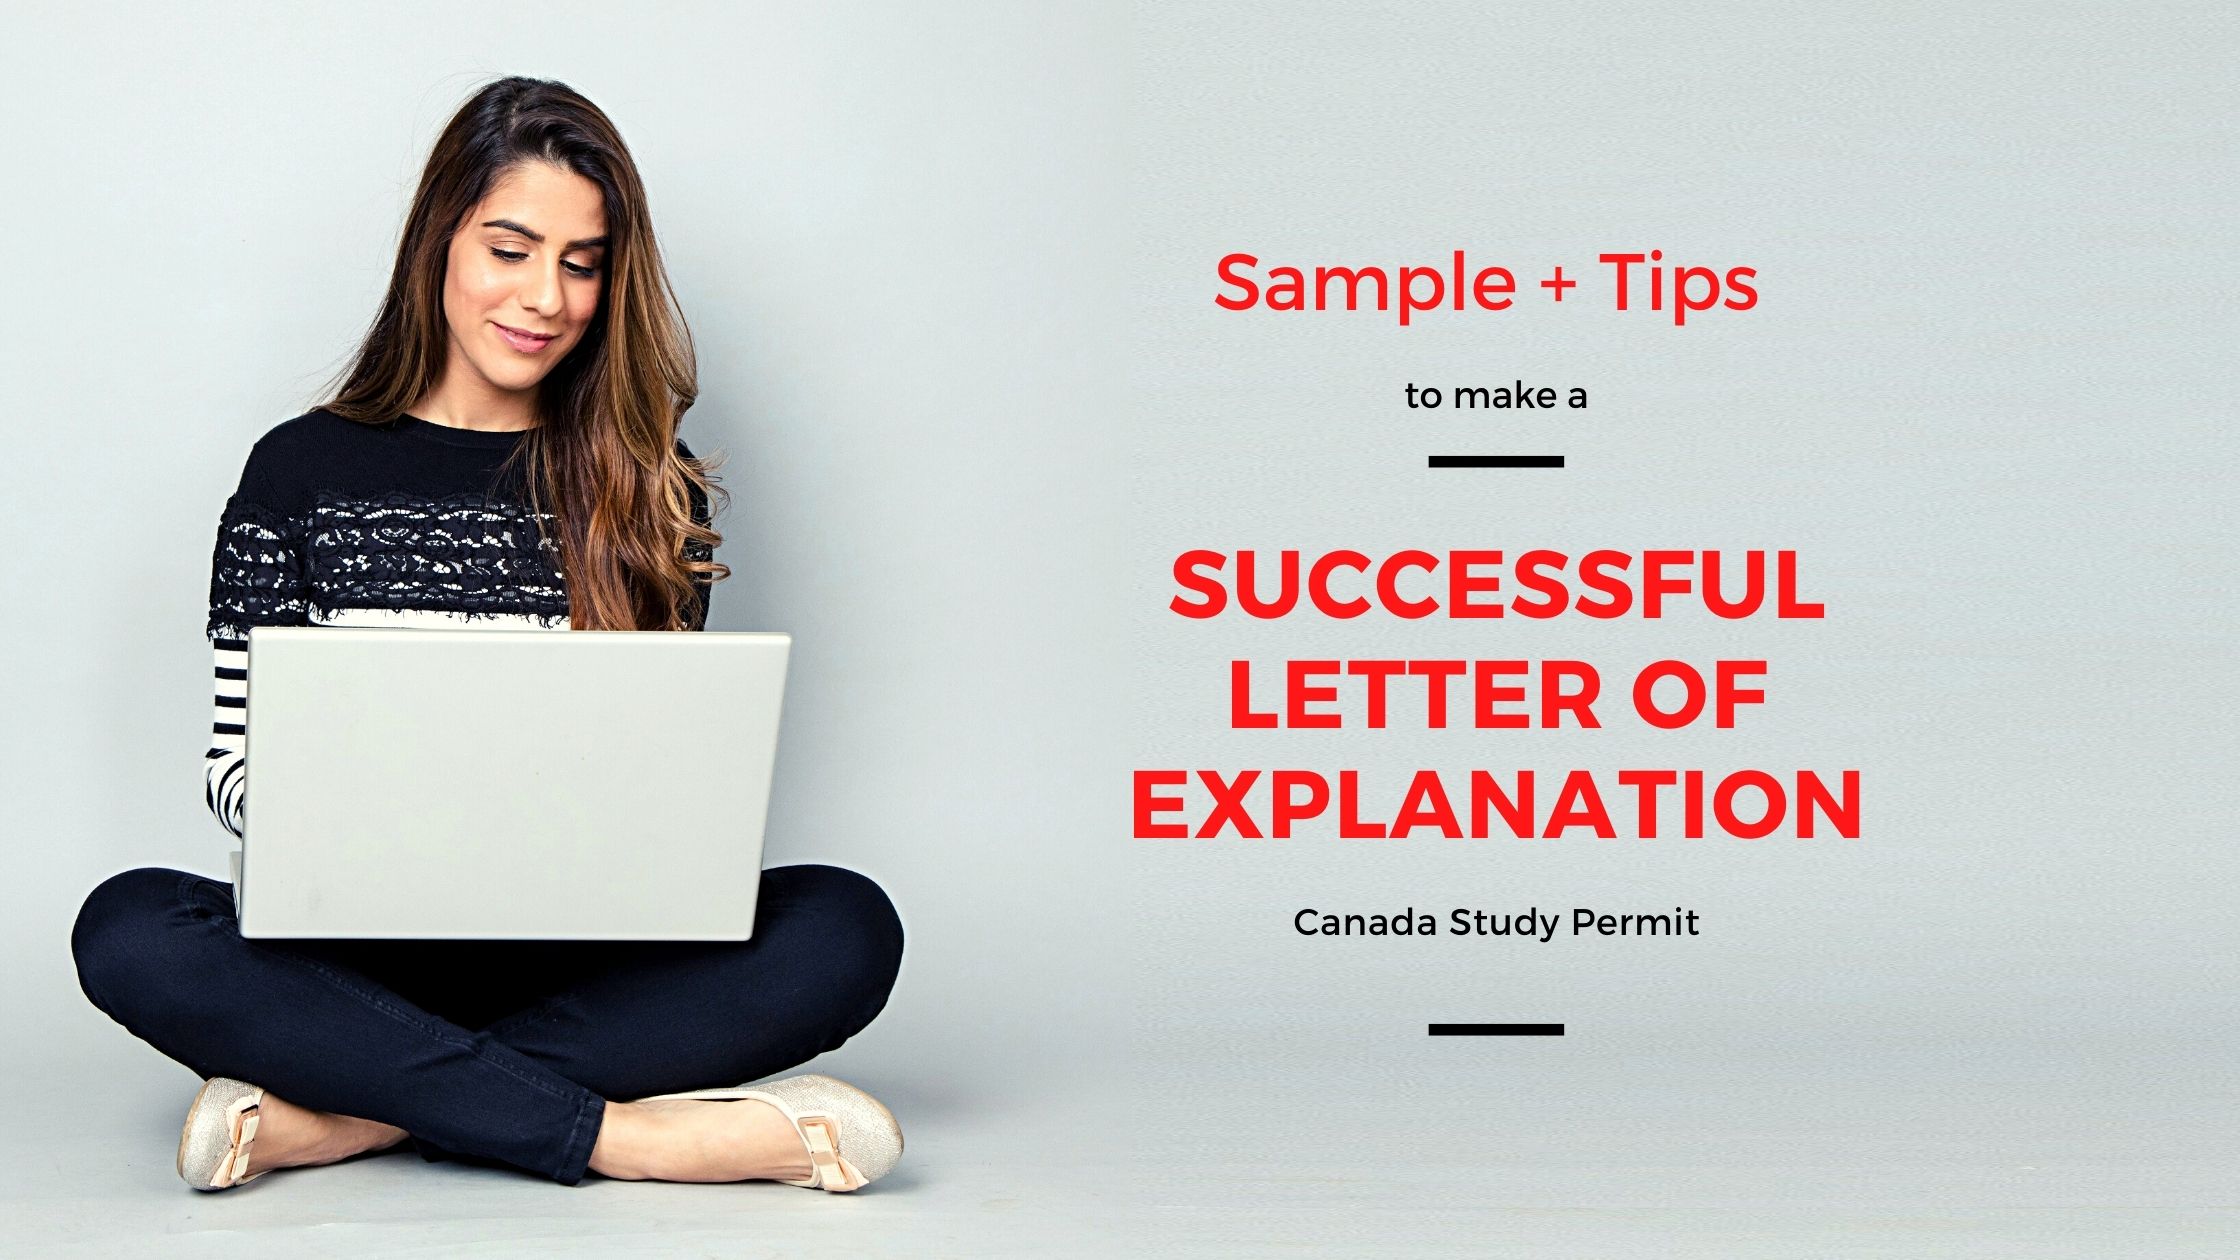 Samples & Tips to Make a Successful LOE for Canada Study Permit